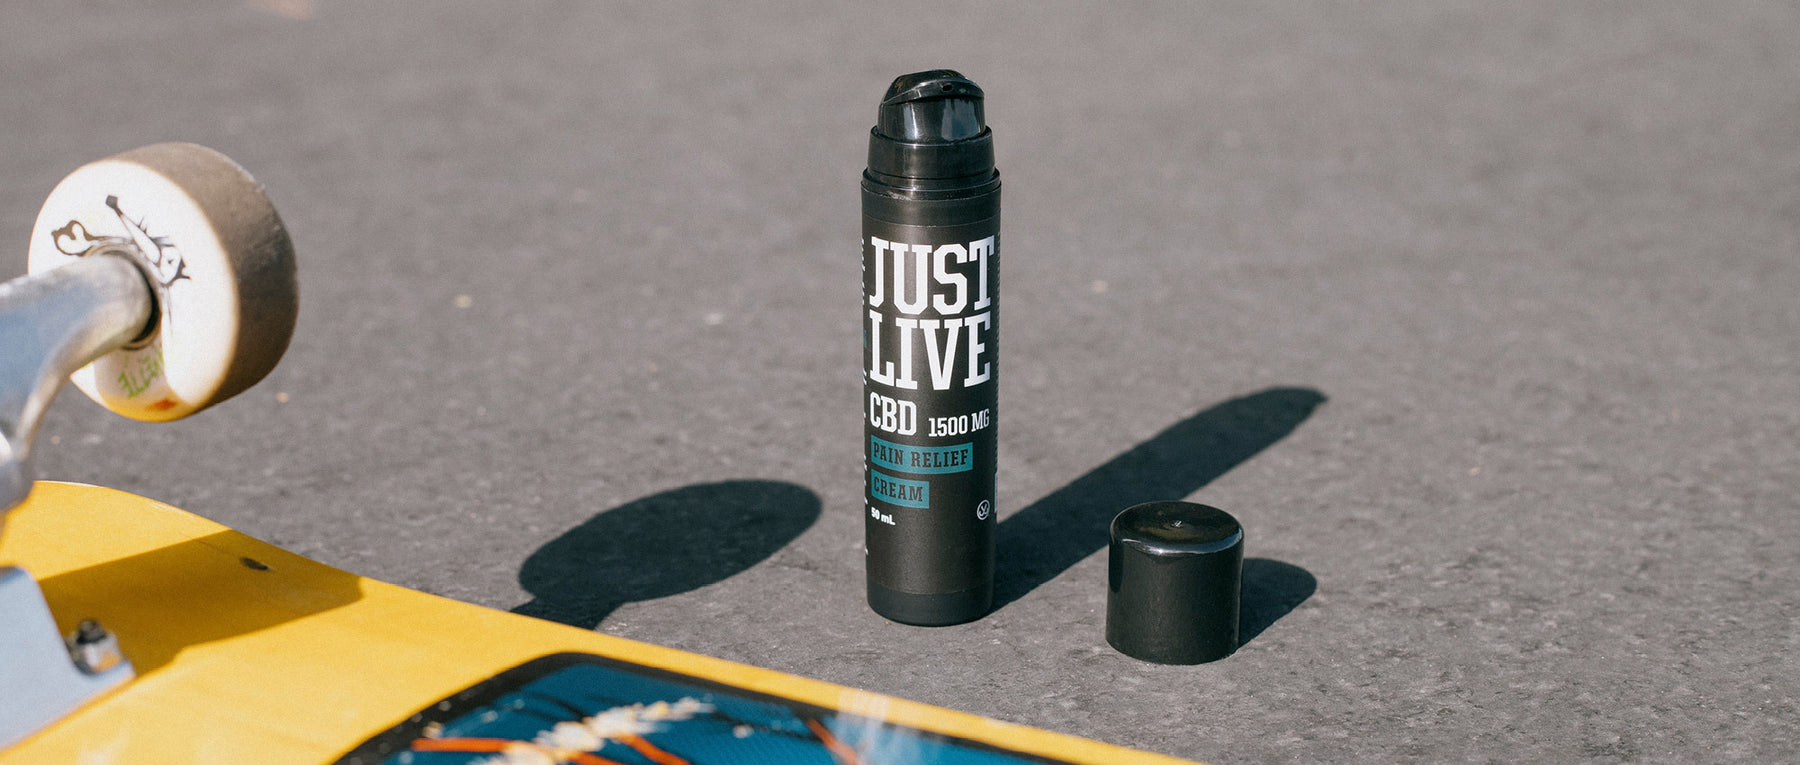 Skateboard Image with Just Live Fast-Acting Pain Relief Cream  